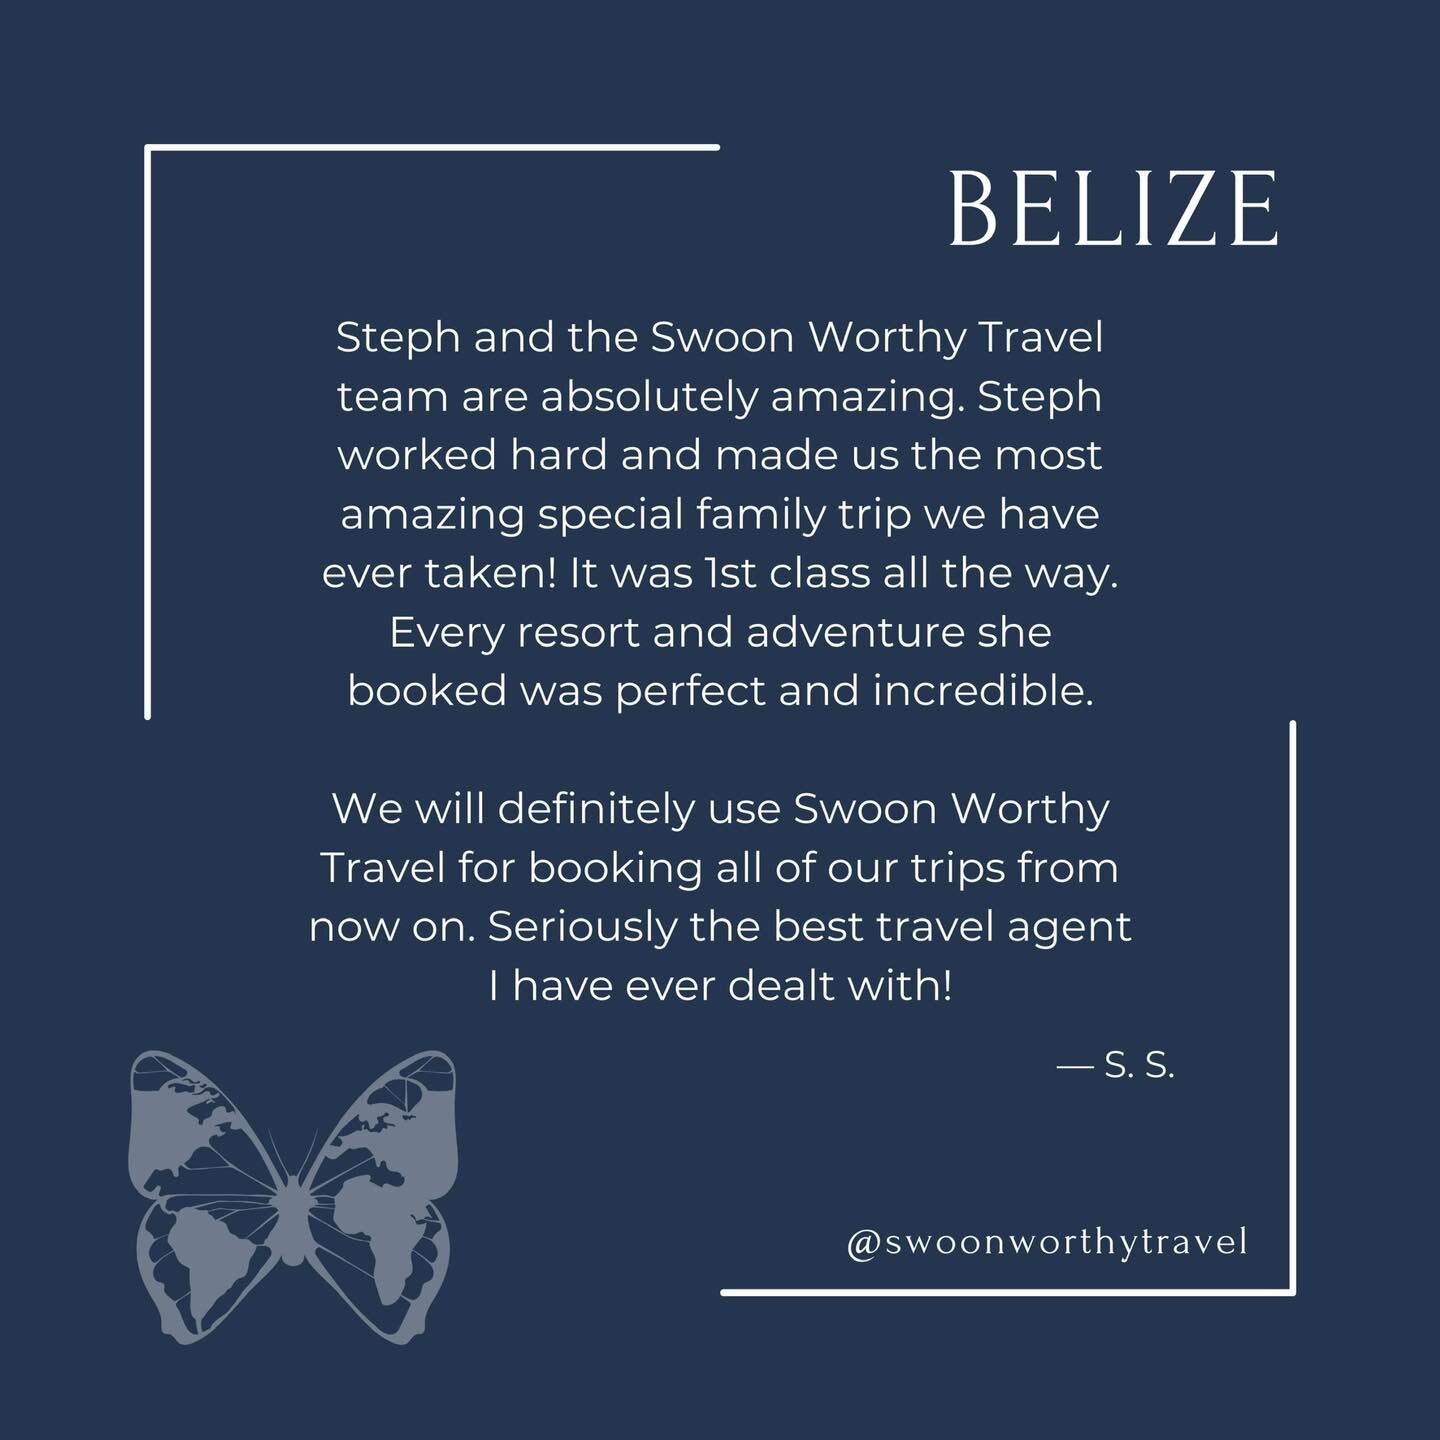 This SWT fam spent a few days each in the jungle and on the beach and they had a blast! ⭐️⭐️⭐️⭐️⭐️

#swoonworthy #belize #belizetravel #beachvacation #jungle #adventuretravel #traveladvisor #luxurytraveladvisor #luxurytravel #swoonworthytravel #first